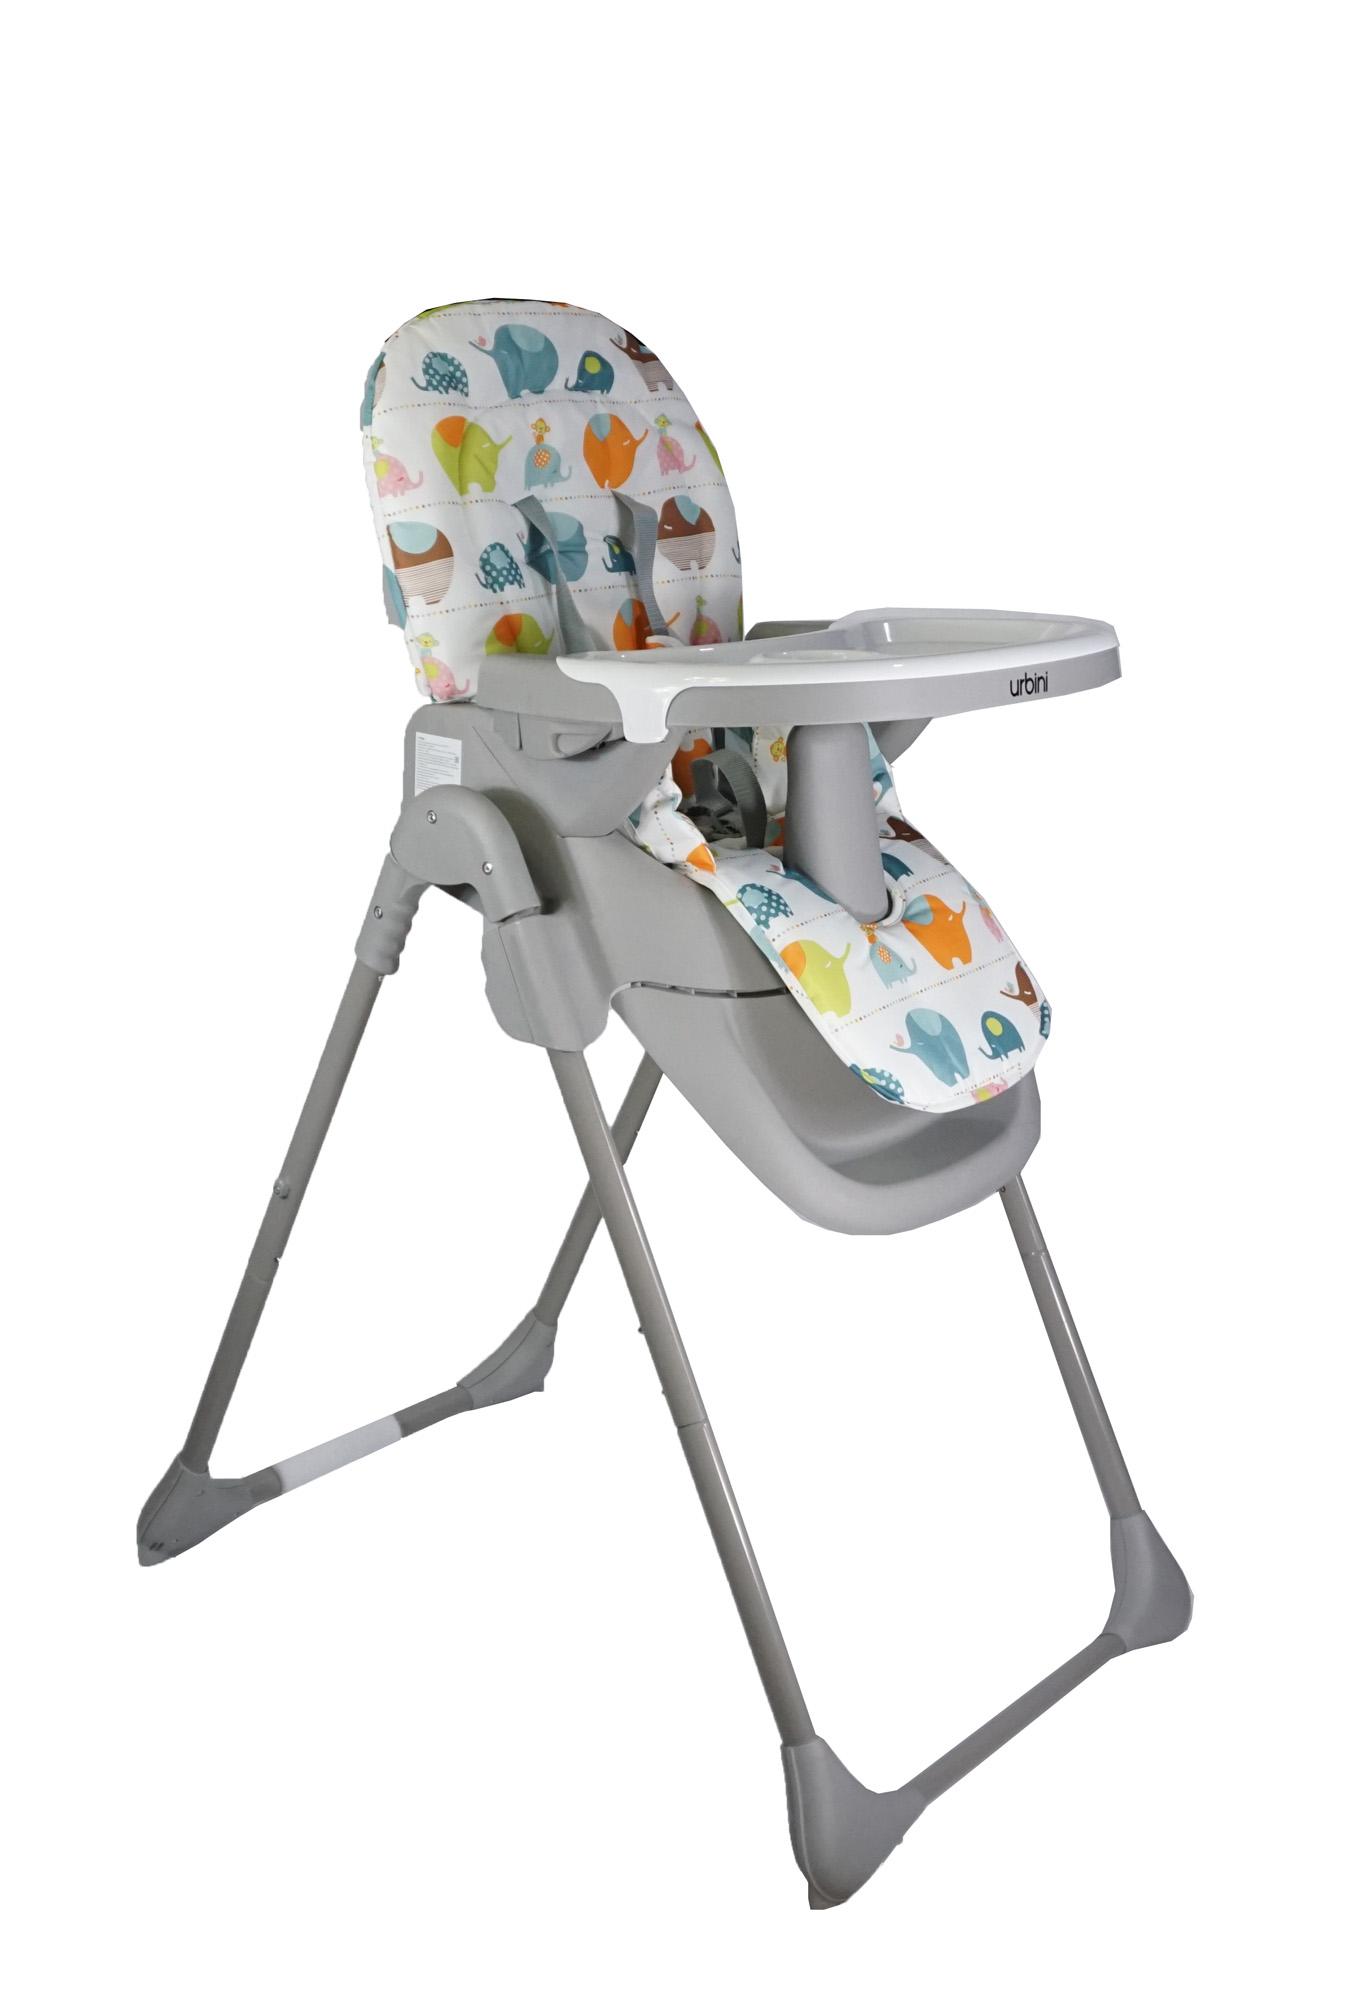 Buy Highchairs At Best Price Online Lazada Com Ph